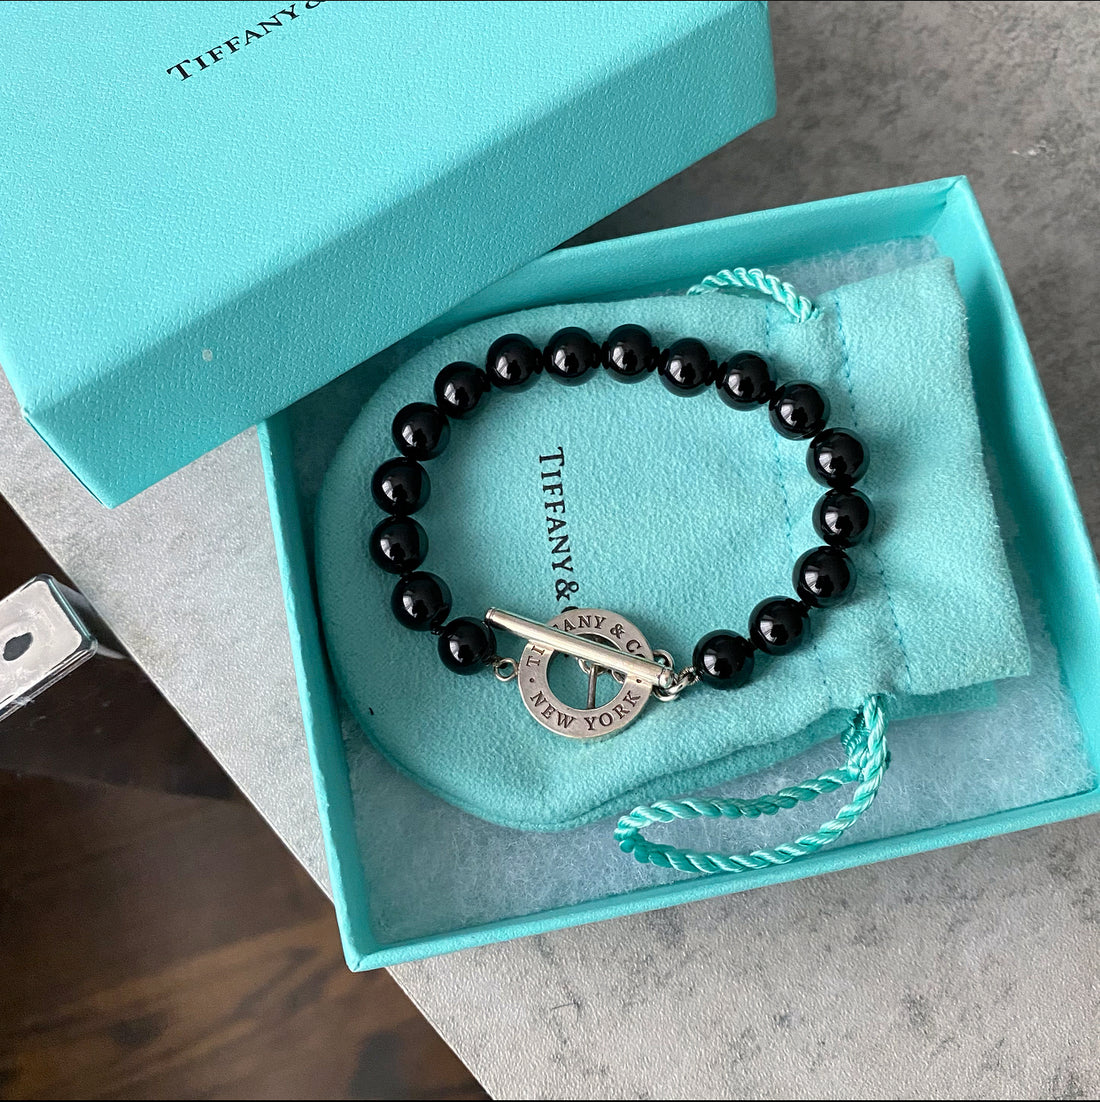 Tiffany & Co.  Black Bead and Sterling Toggle Bracelet